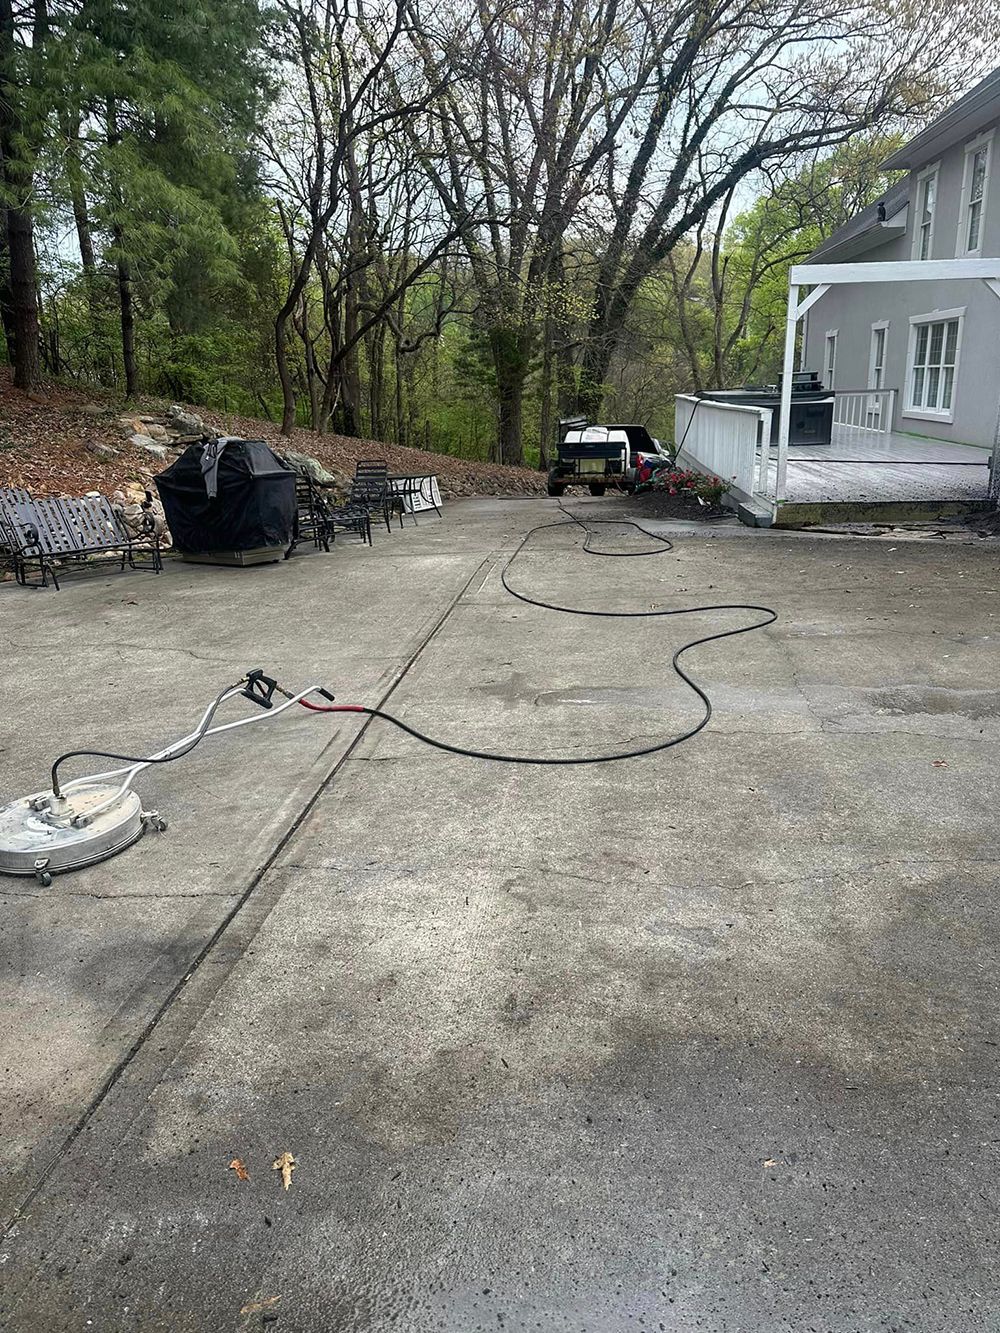 A concrete driveway with a hose attached to it and a house in the background